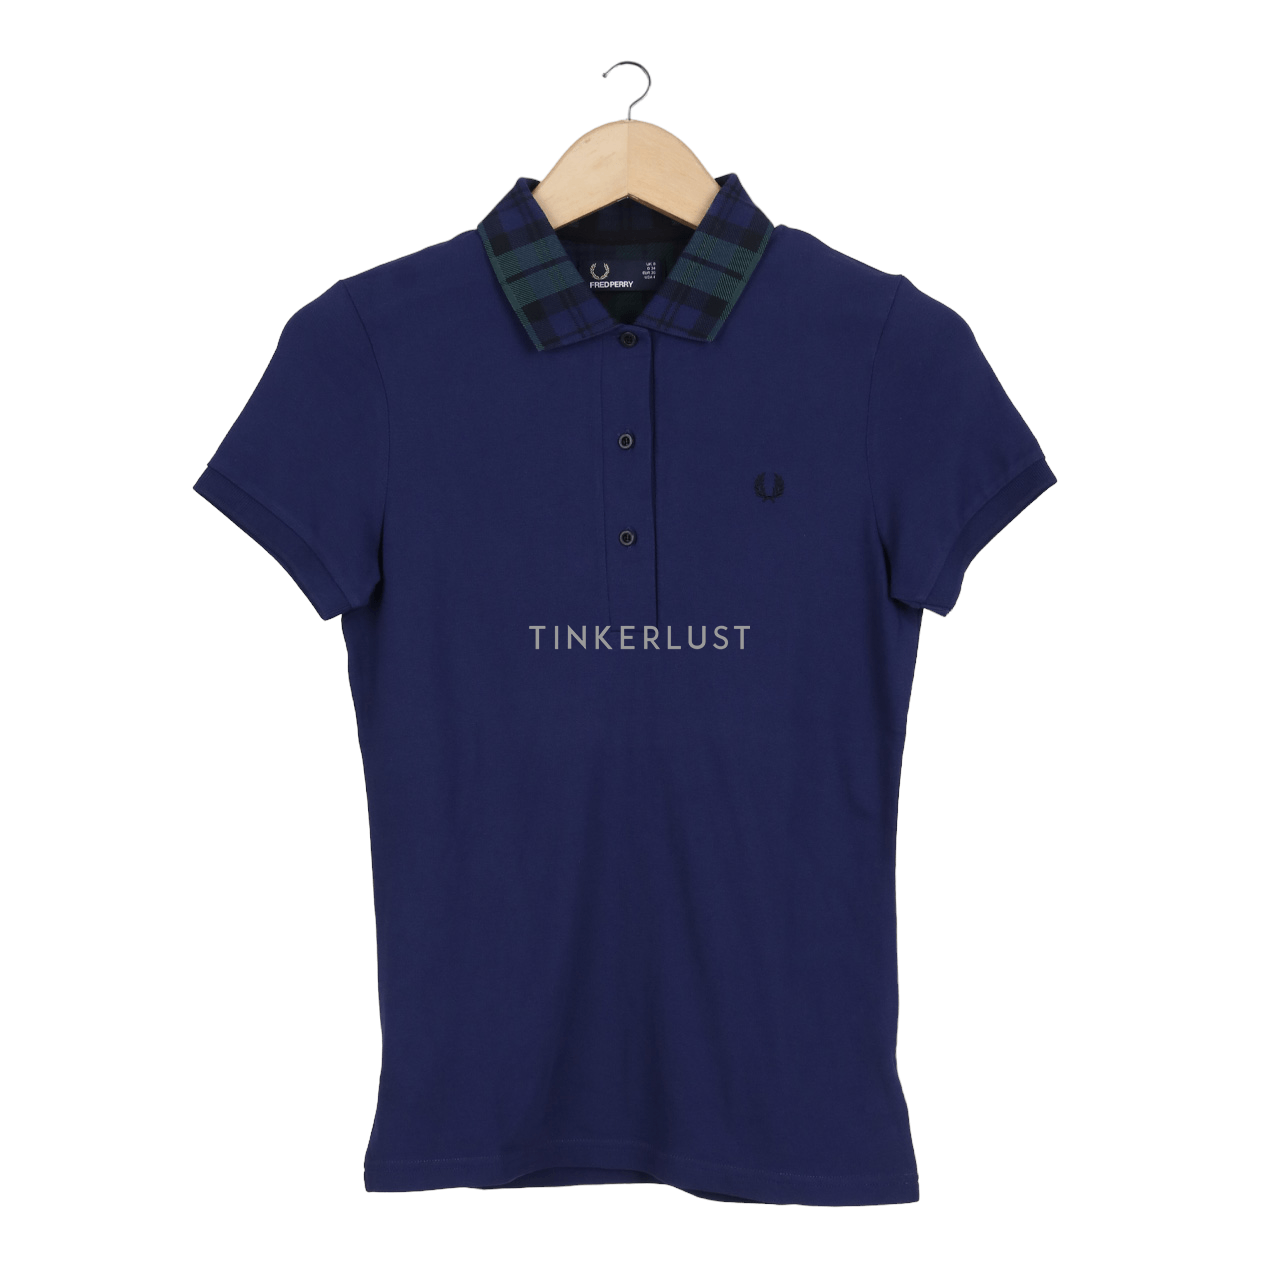 Fred Perry Blue Polo Shirt